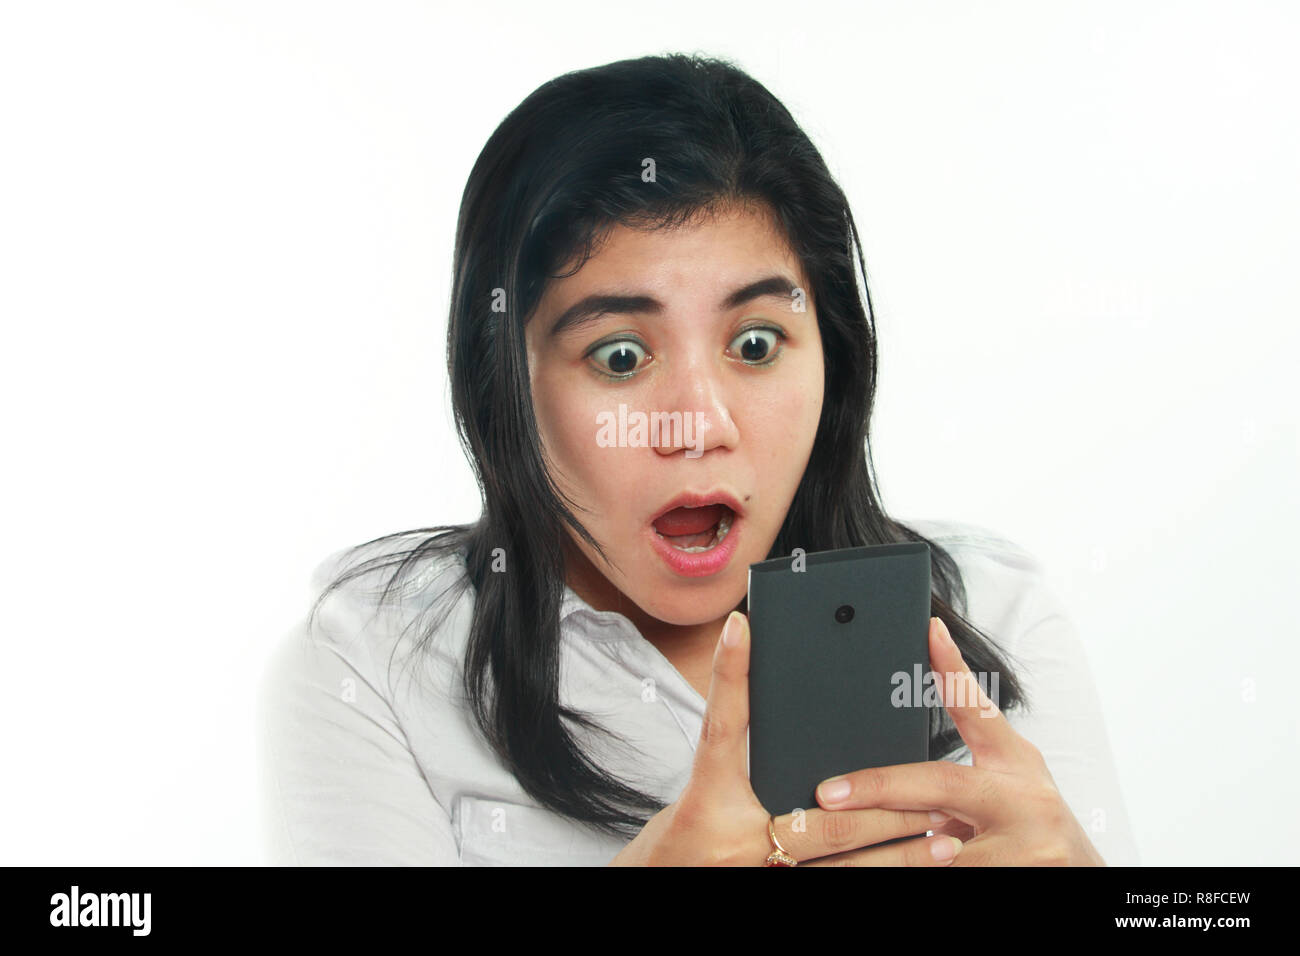 Photo image portrait of a cute young Asian woman with mole looked shocked looking her smart phone. Holding phone with both hands while reading message Stock Photo